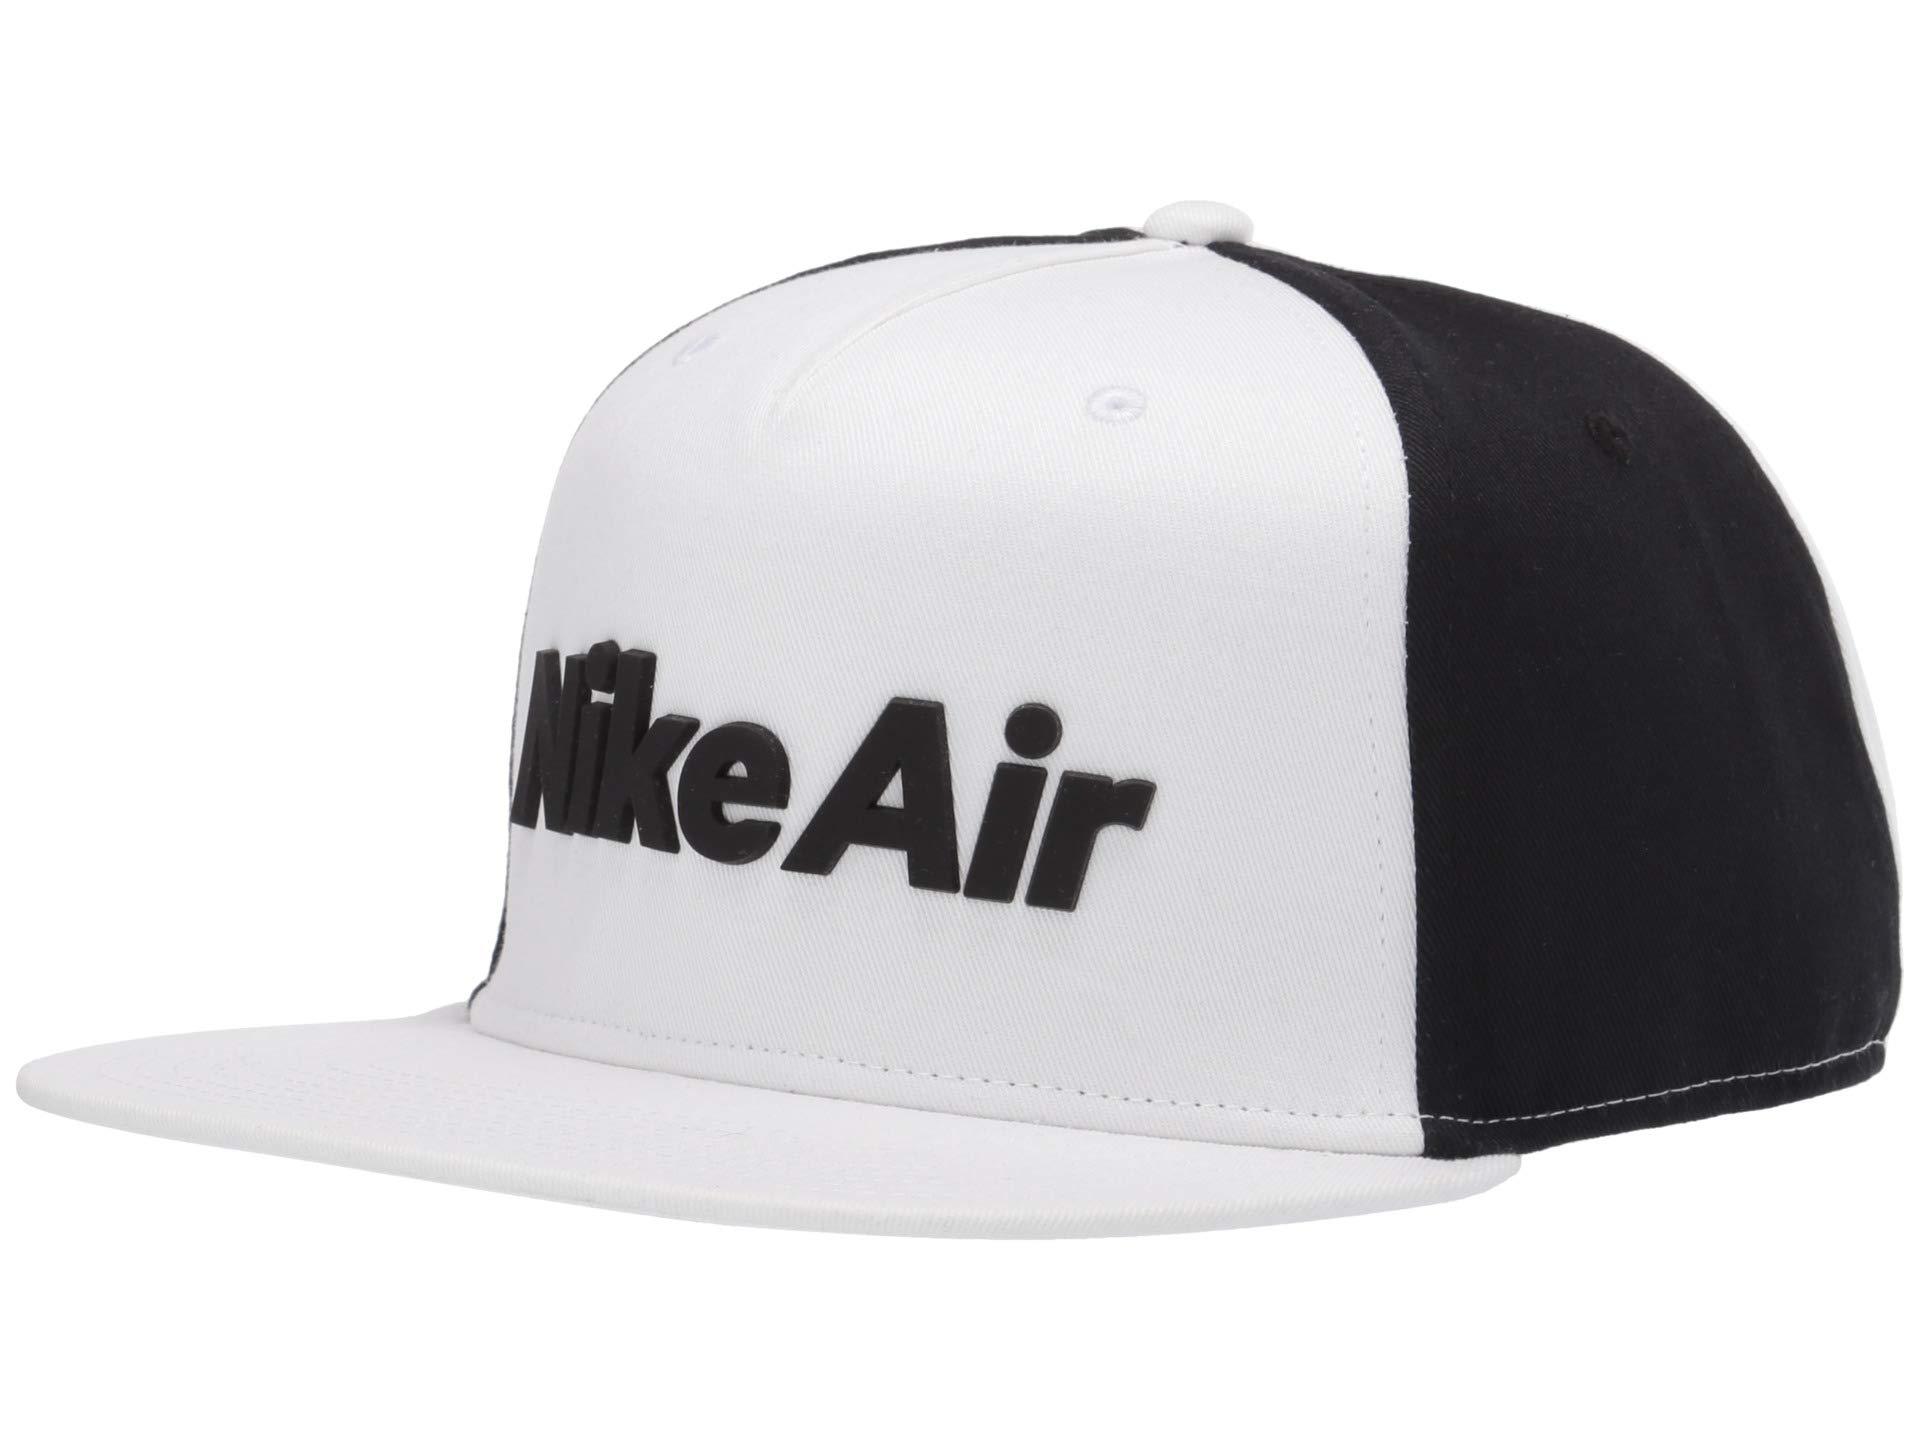 Nike Cotton Air Pro Capsule Hat in 